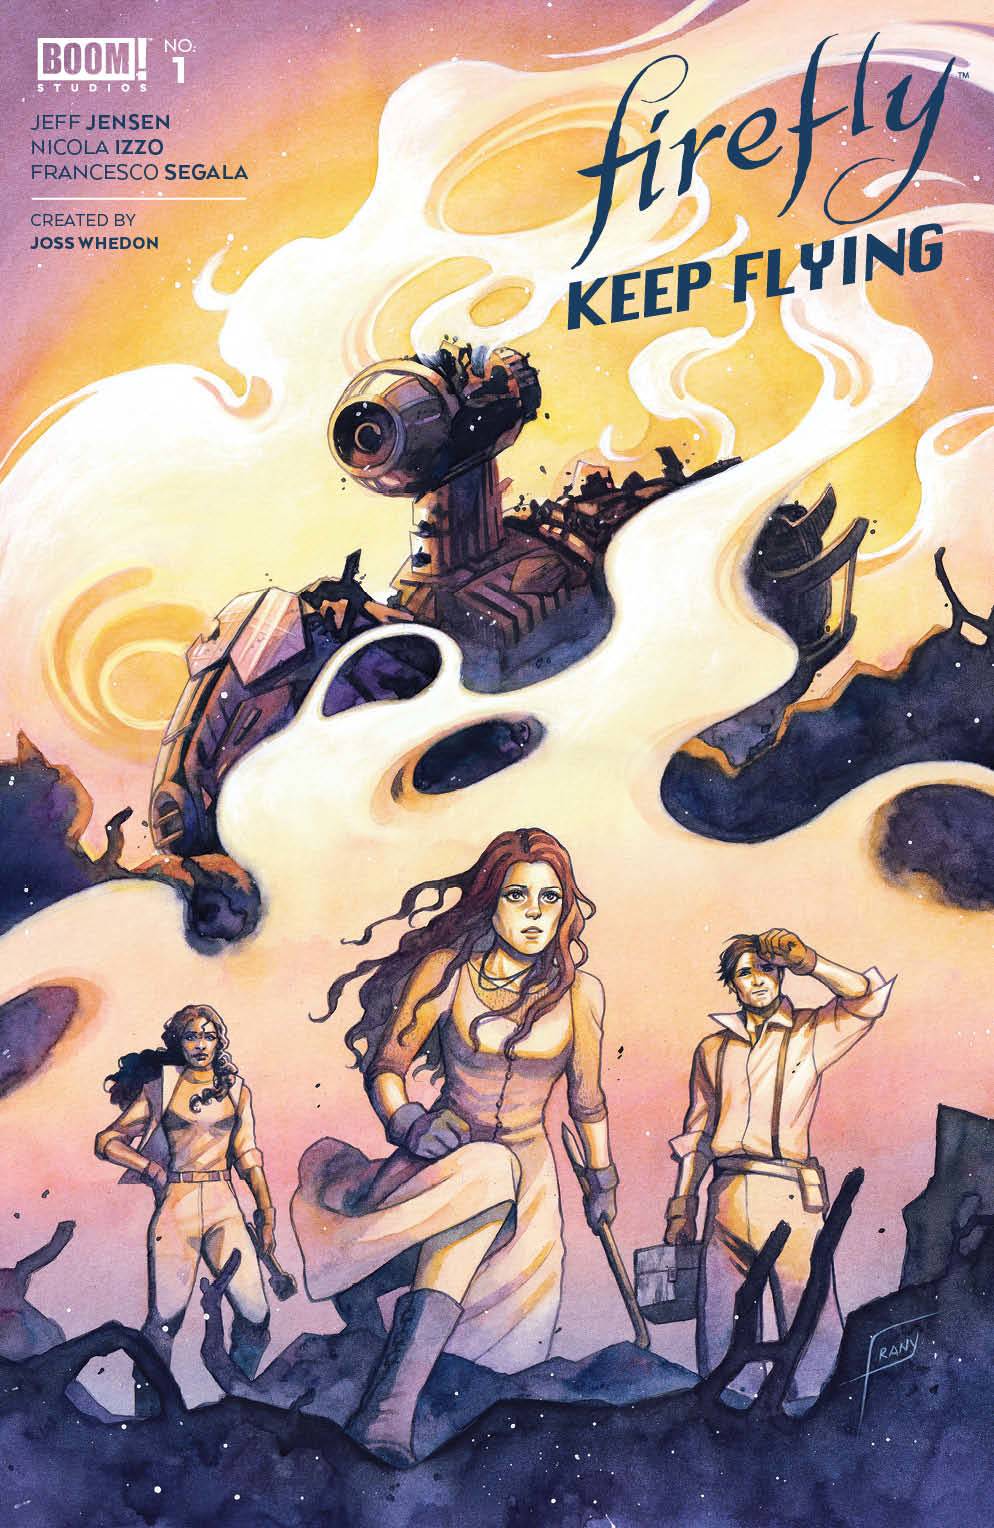 Firefly Keep Flying #1 Cover A Frany